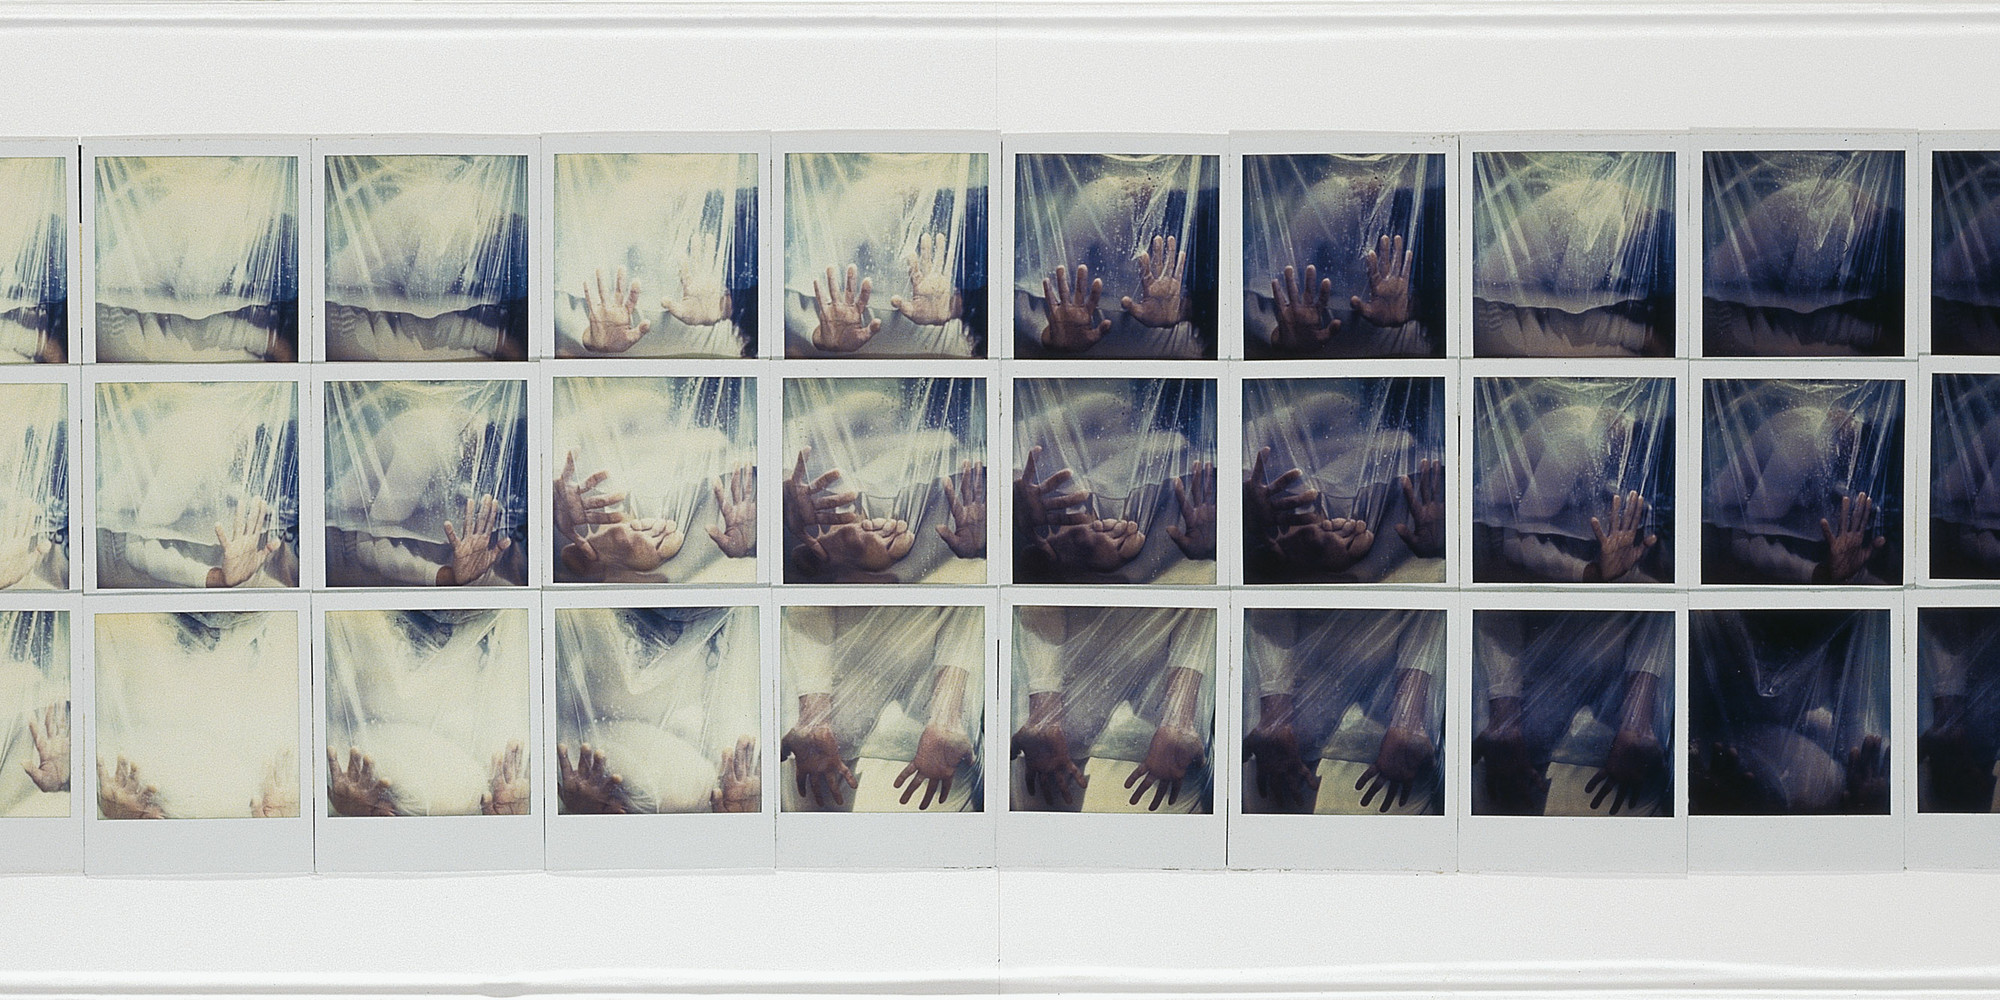 Yeni &amp; Nan. Integrations in Water. 1981. Color instant prints (Polaroid), 11 × 55 9/16&#34; (28 × 141.2 cm). The Museum of Modern Art, New York. Gift of Patricia Phelps de Cisneros through the Latin American and Caribbean Fund in honor of Mauro Herlitzka. © 2022 Yeni &amp; Nan